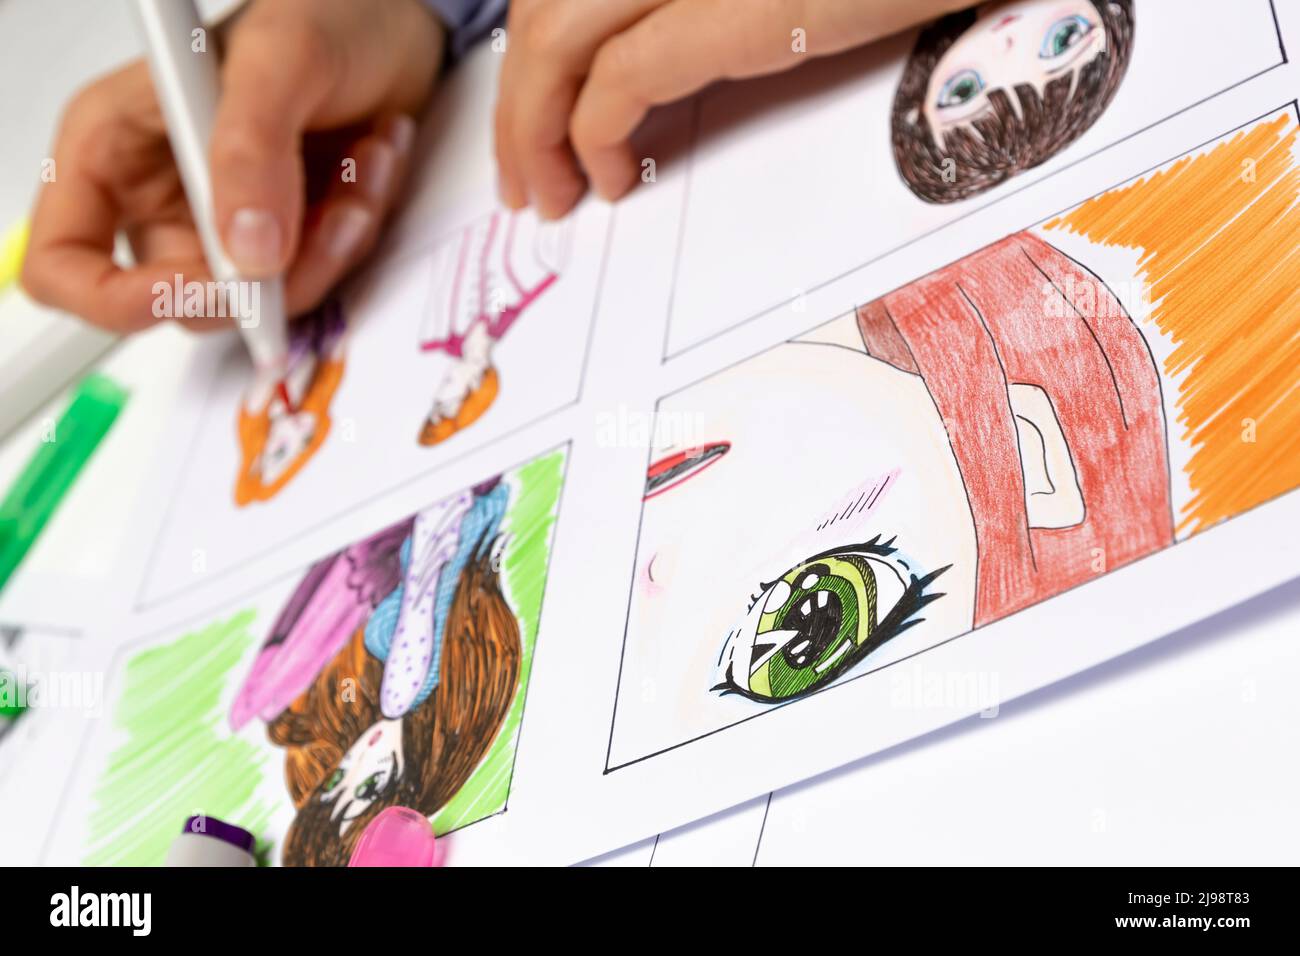 The Artist Draws Anime Comics On Paper Storyboard For The Cartoon The  Illustrator Creates Sketches For The Book Stock Photo - Download Image Now  - iStock